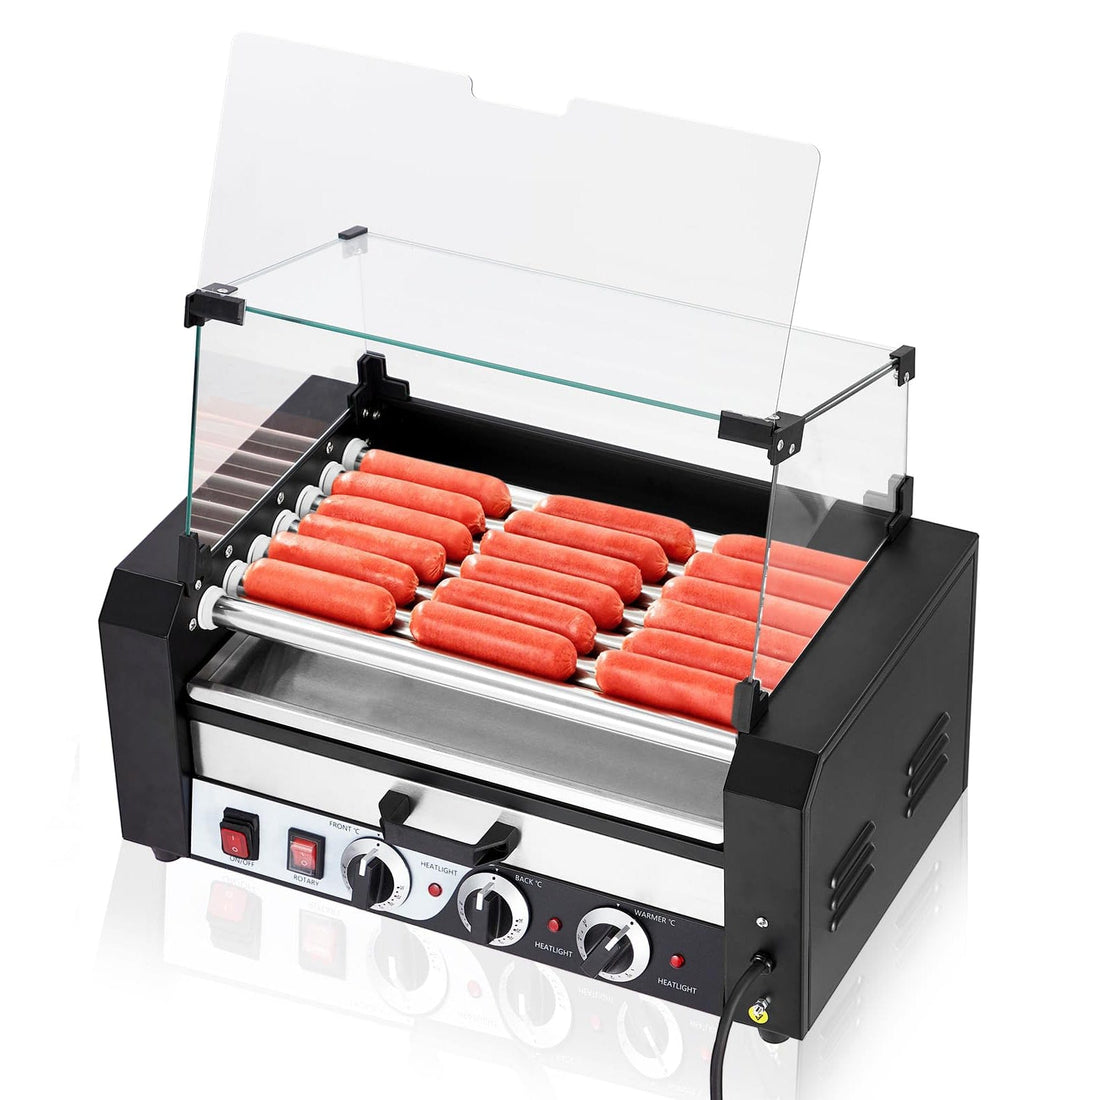 GARVEE Hot Dog Roller 7 Rollers 18 Hot Dogs Capacity 1350W Stainless Sausage Grill Cooker Machine